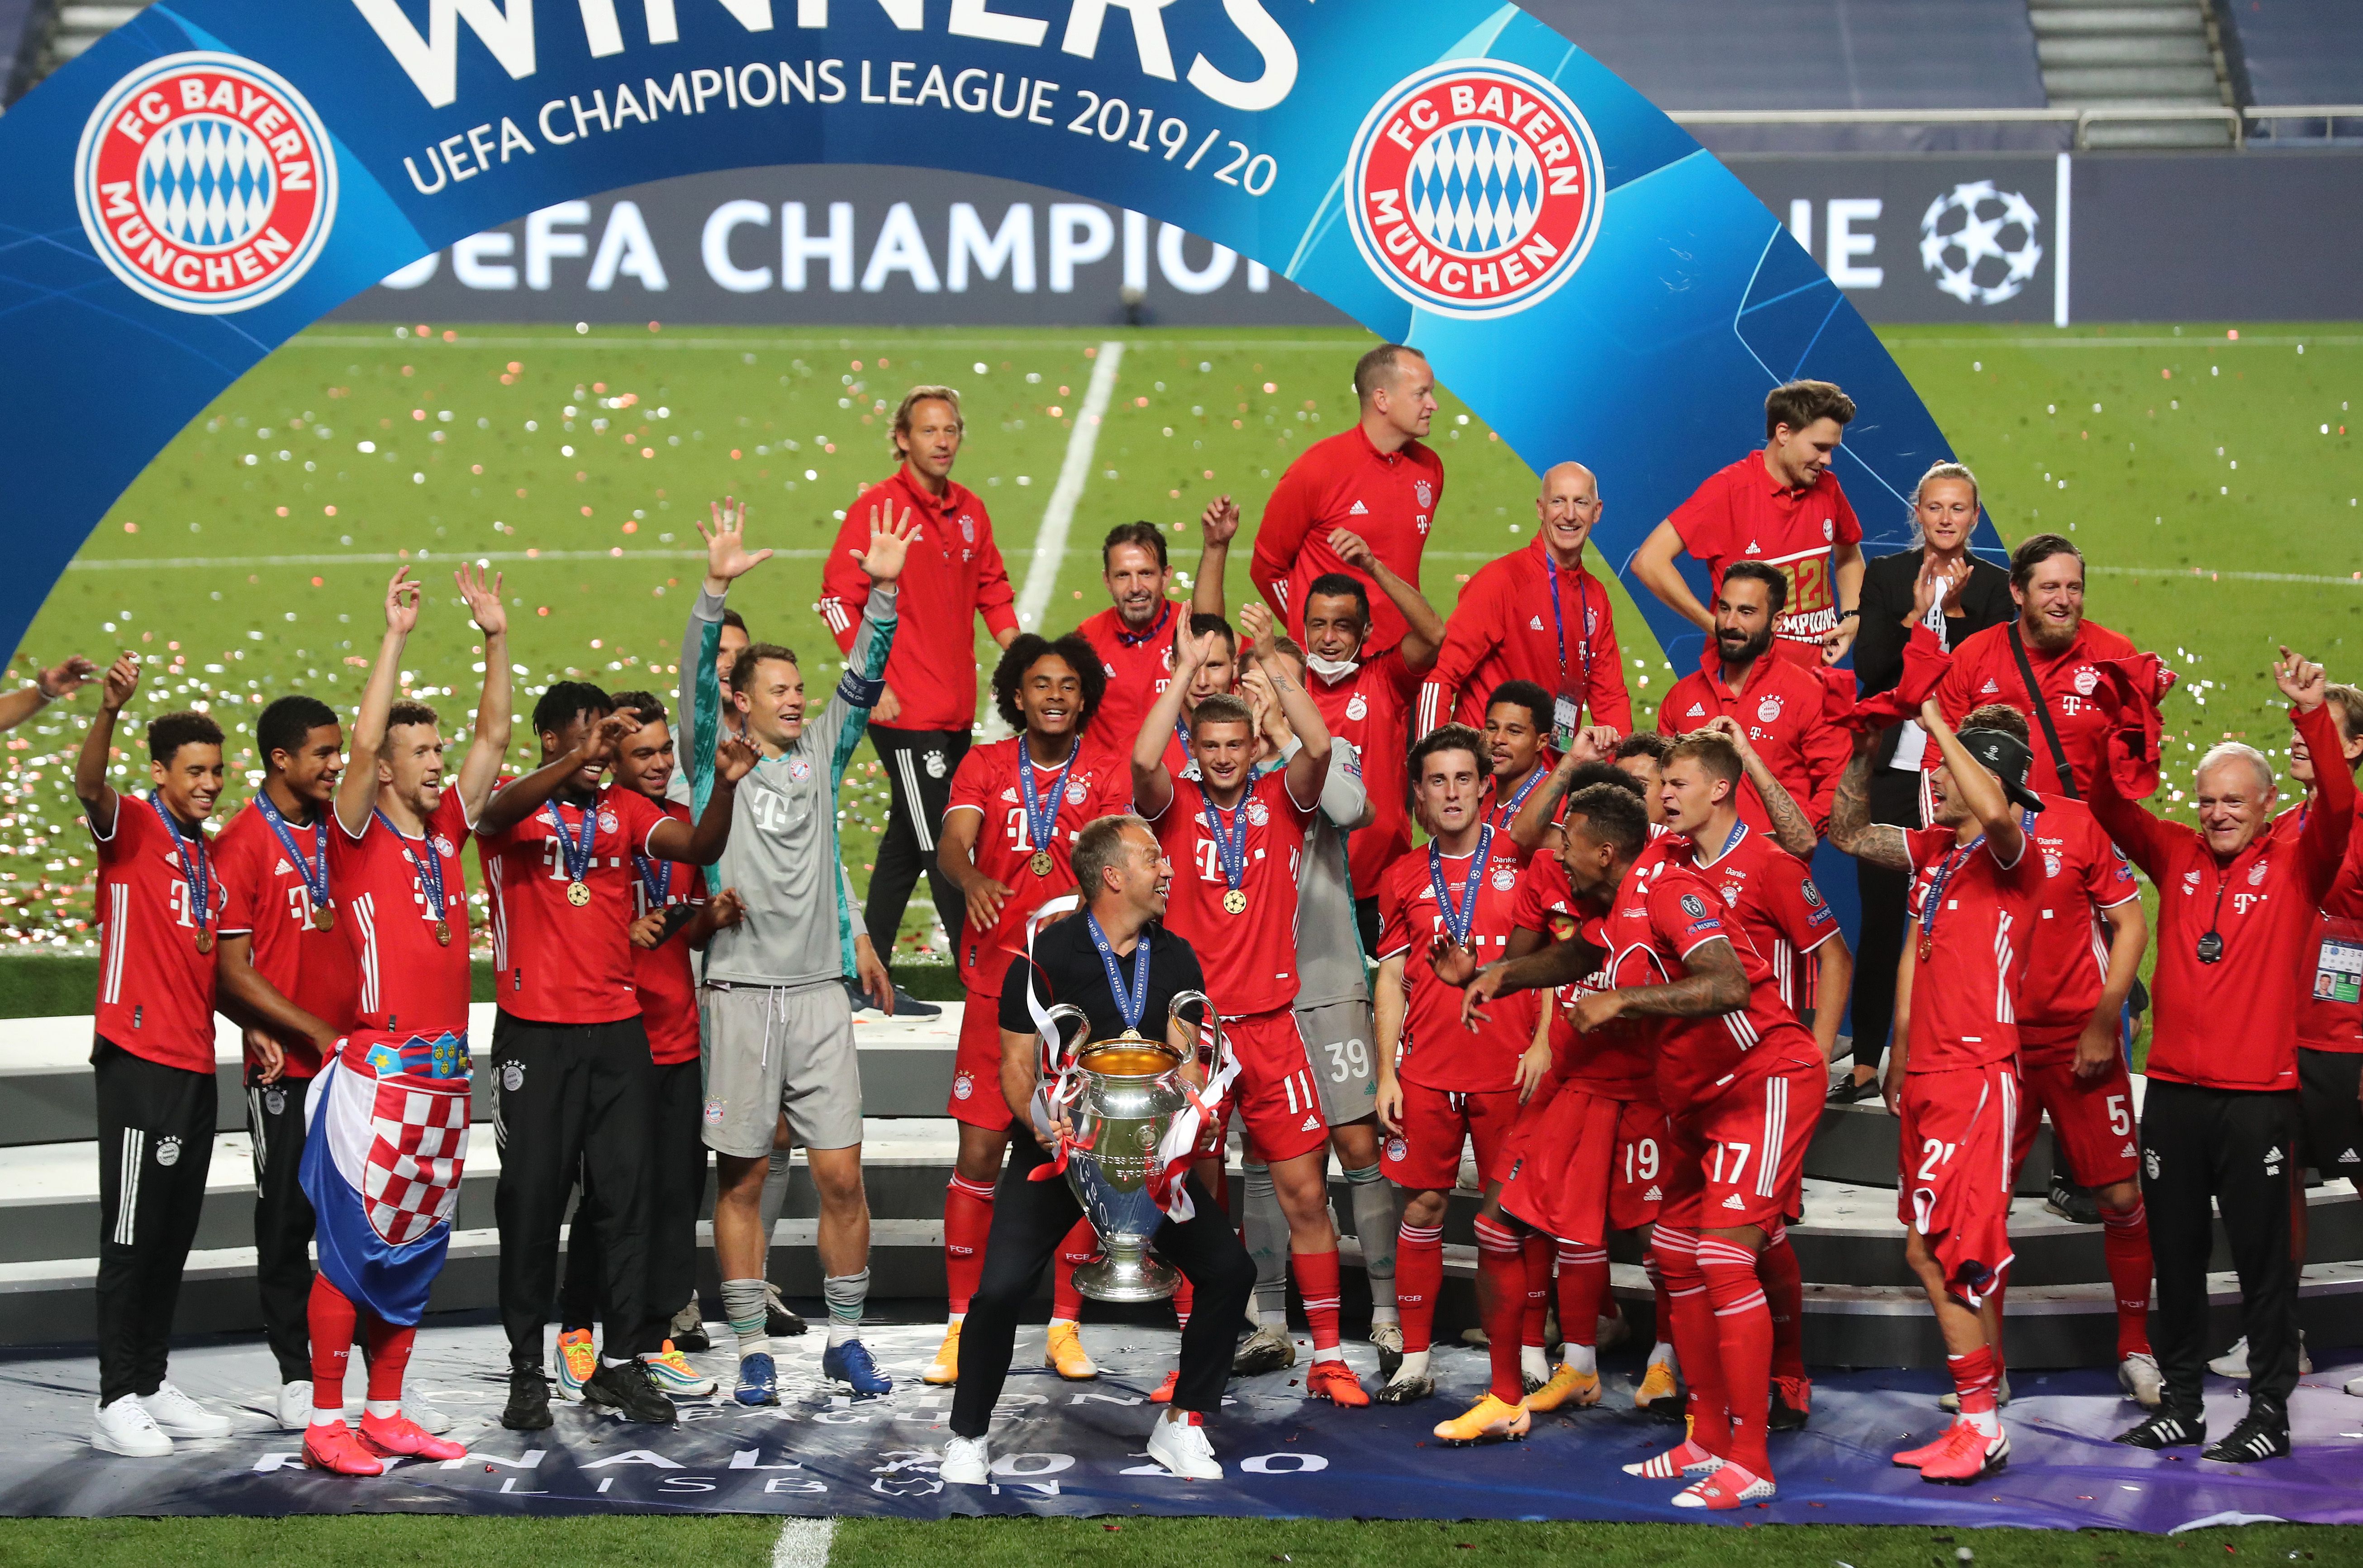 Bayern Munich celebrates with the UEFA Champions League Trophy following their victory against PSG.